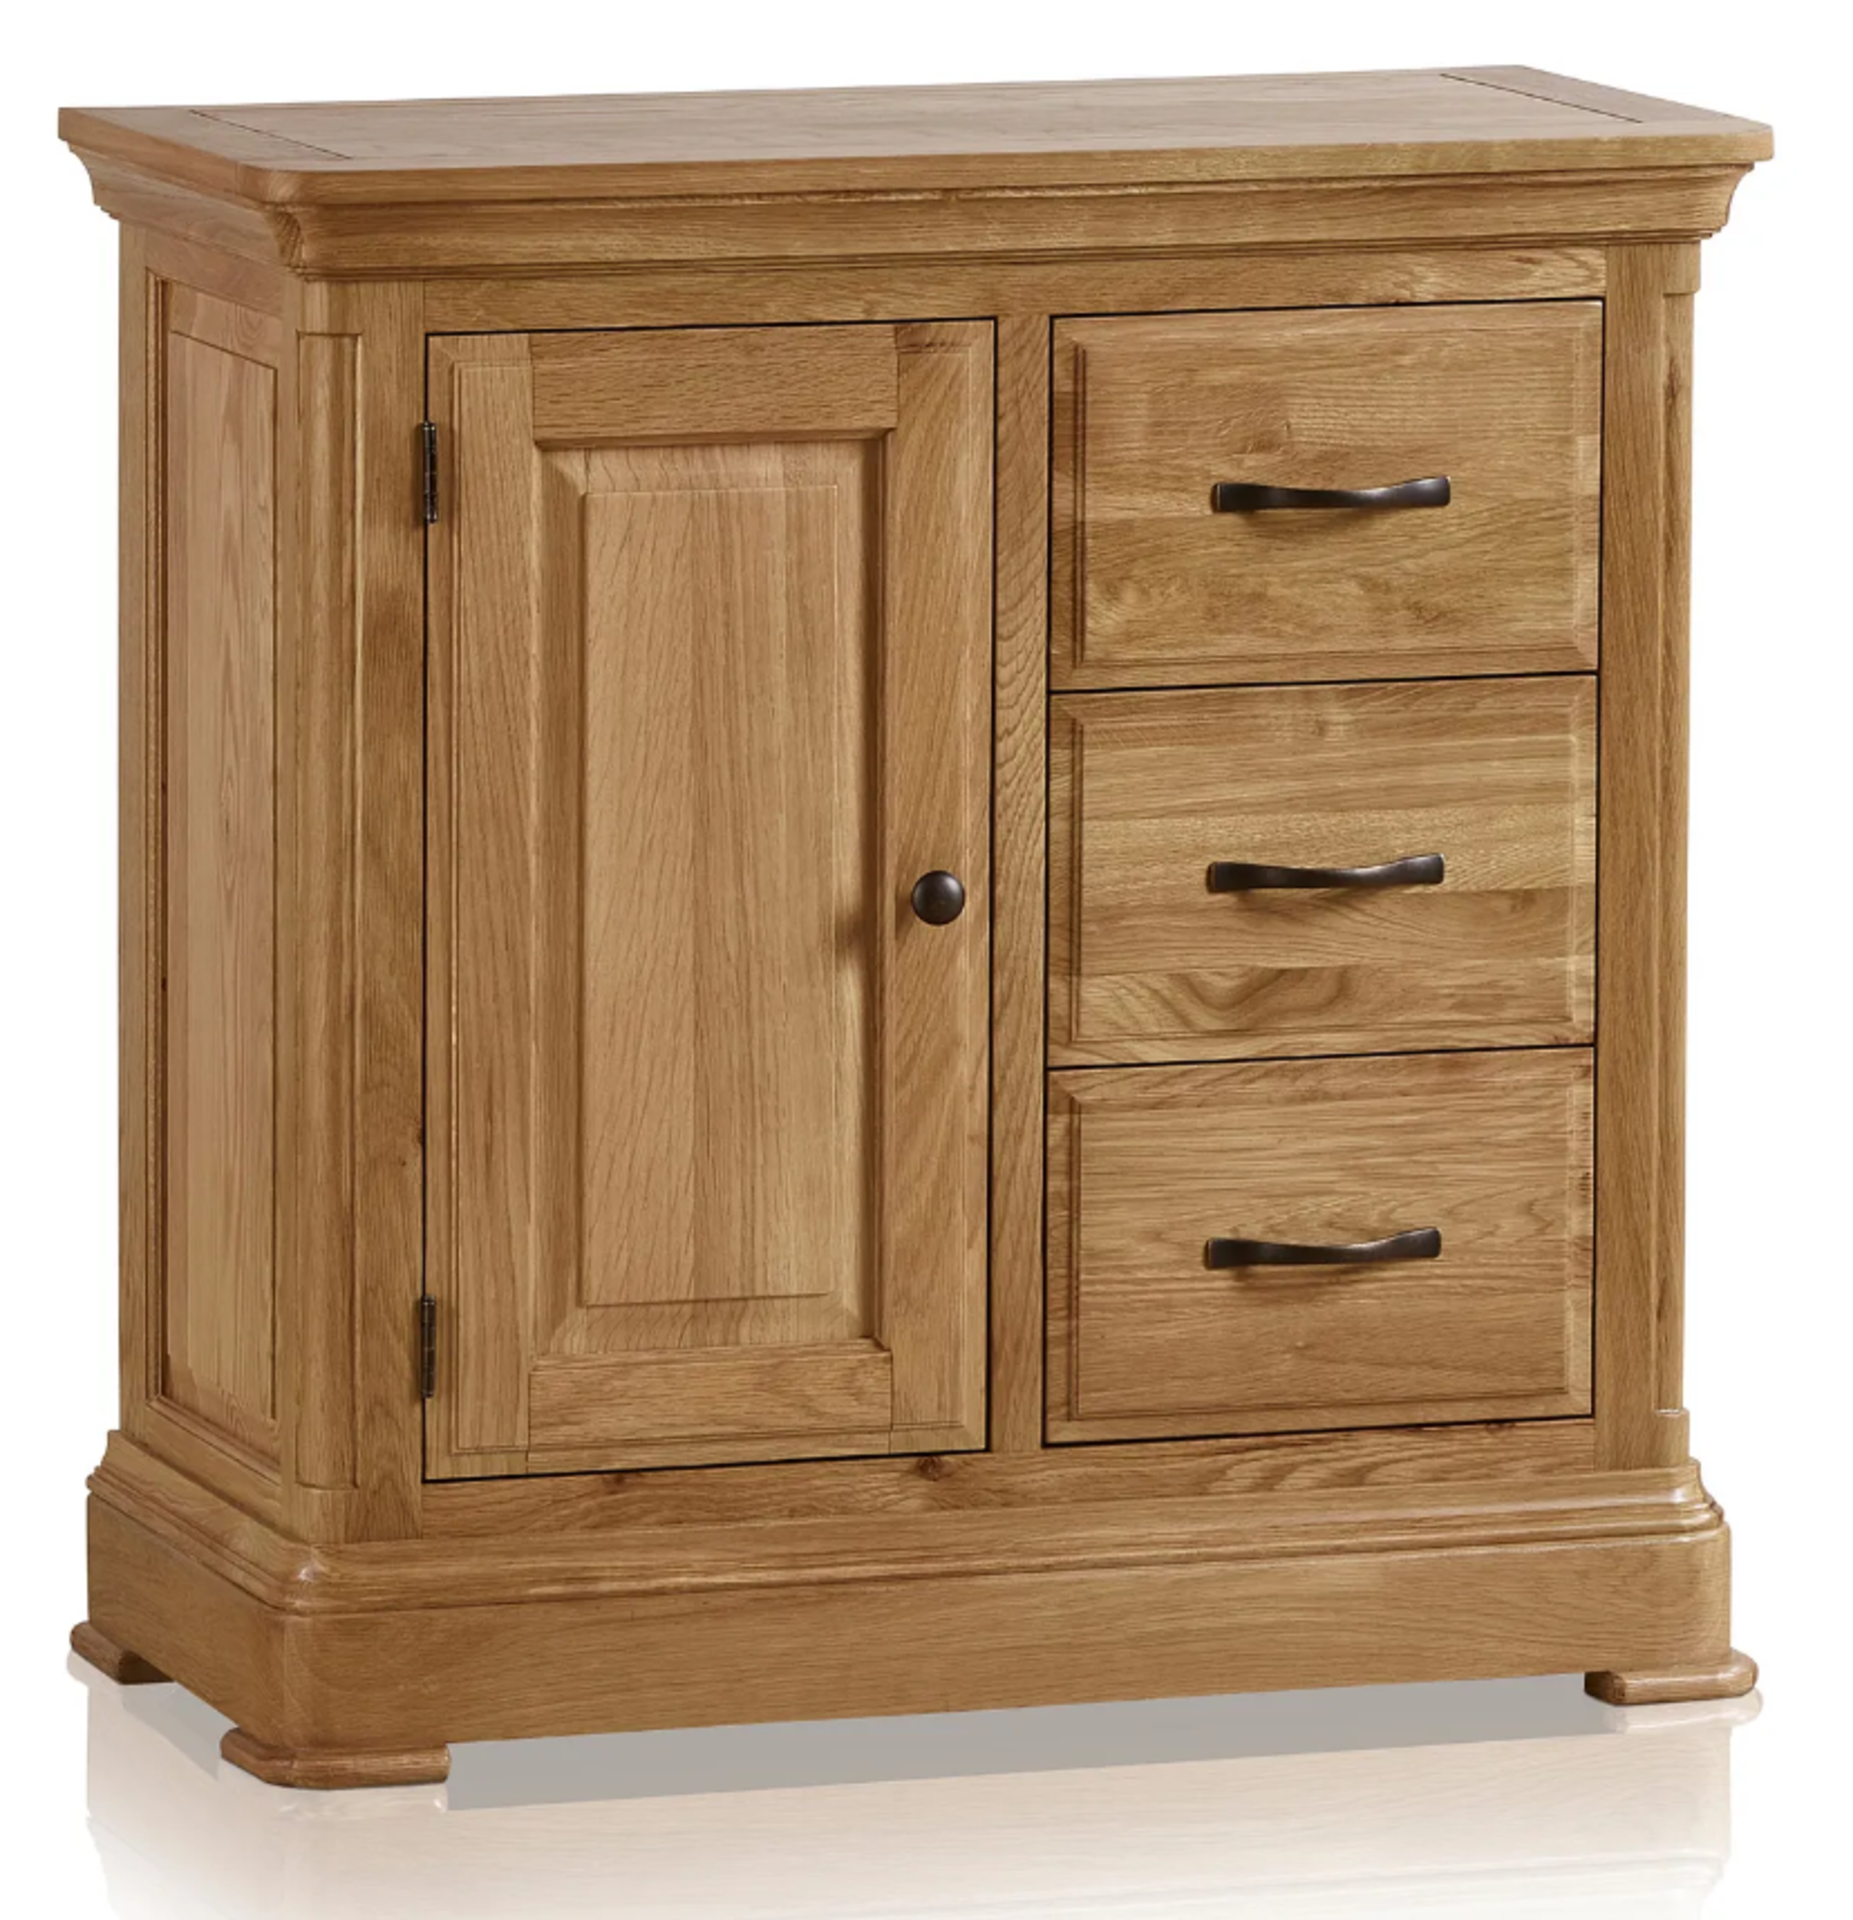 CANTERBURY Natural Solid Oak Storage Cabinet. RRP £499.99. Perfect for those looking to add a bit